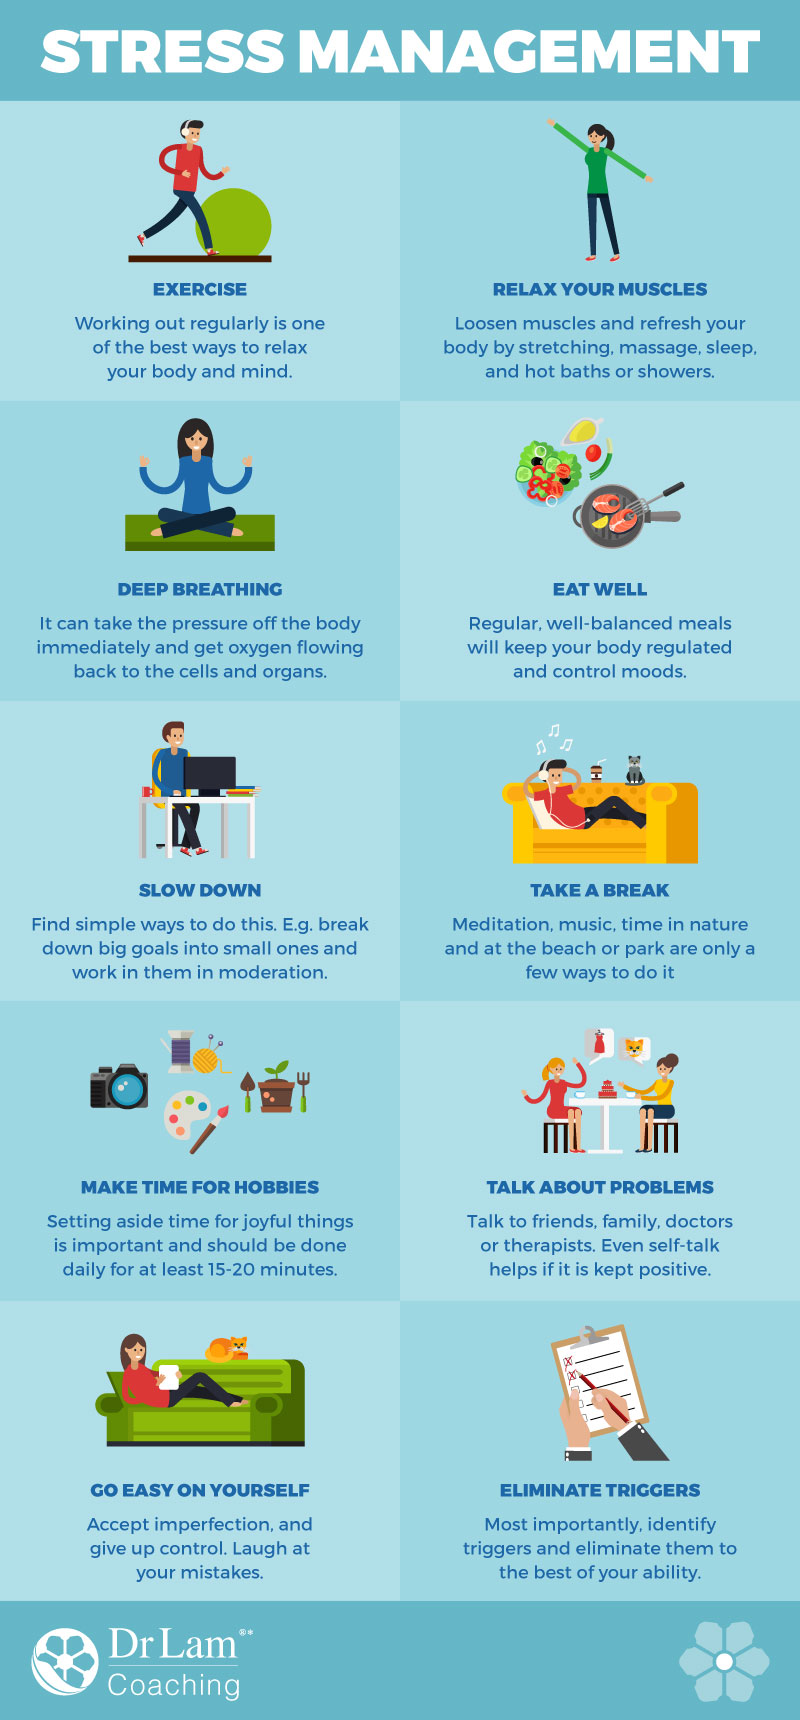 Check out this easy to understand infographic about stress management to prevent heart disease